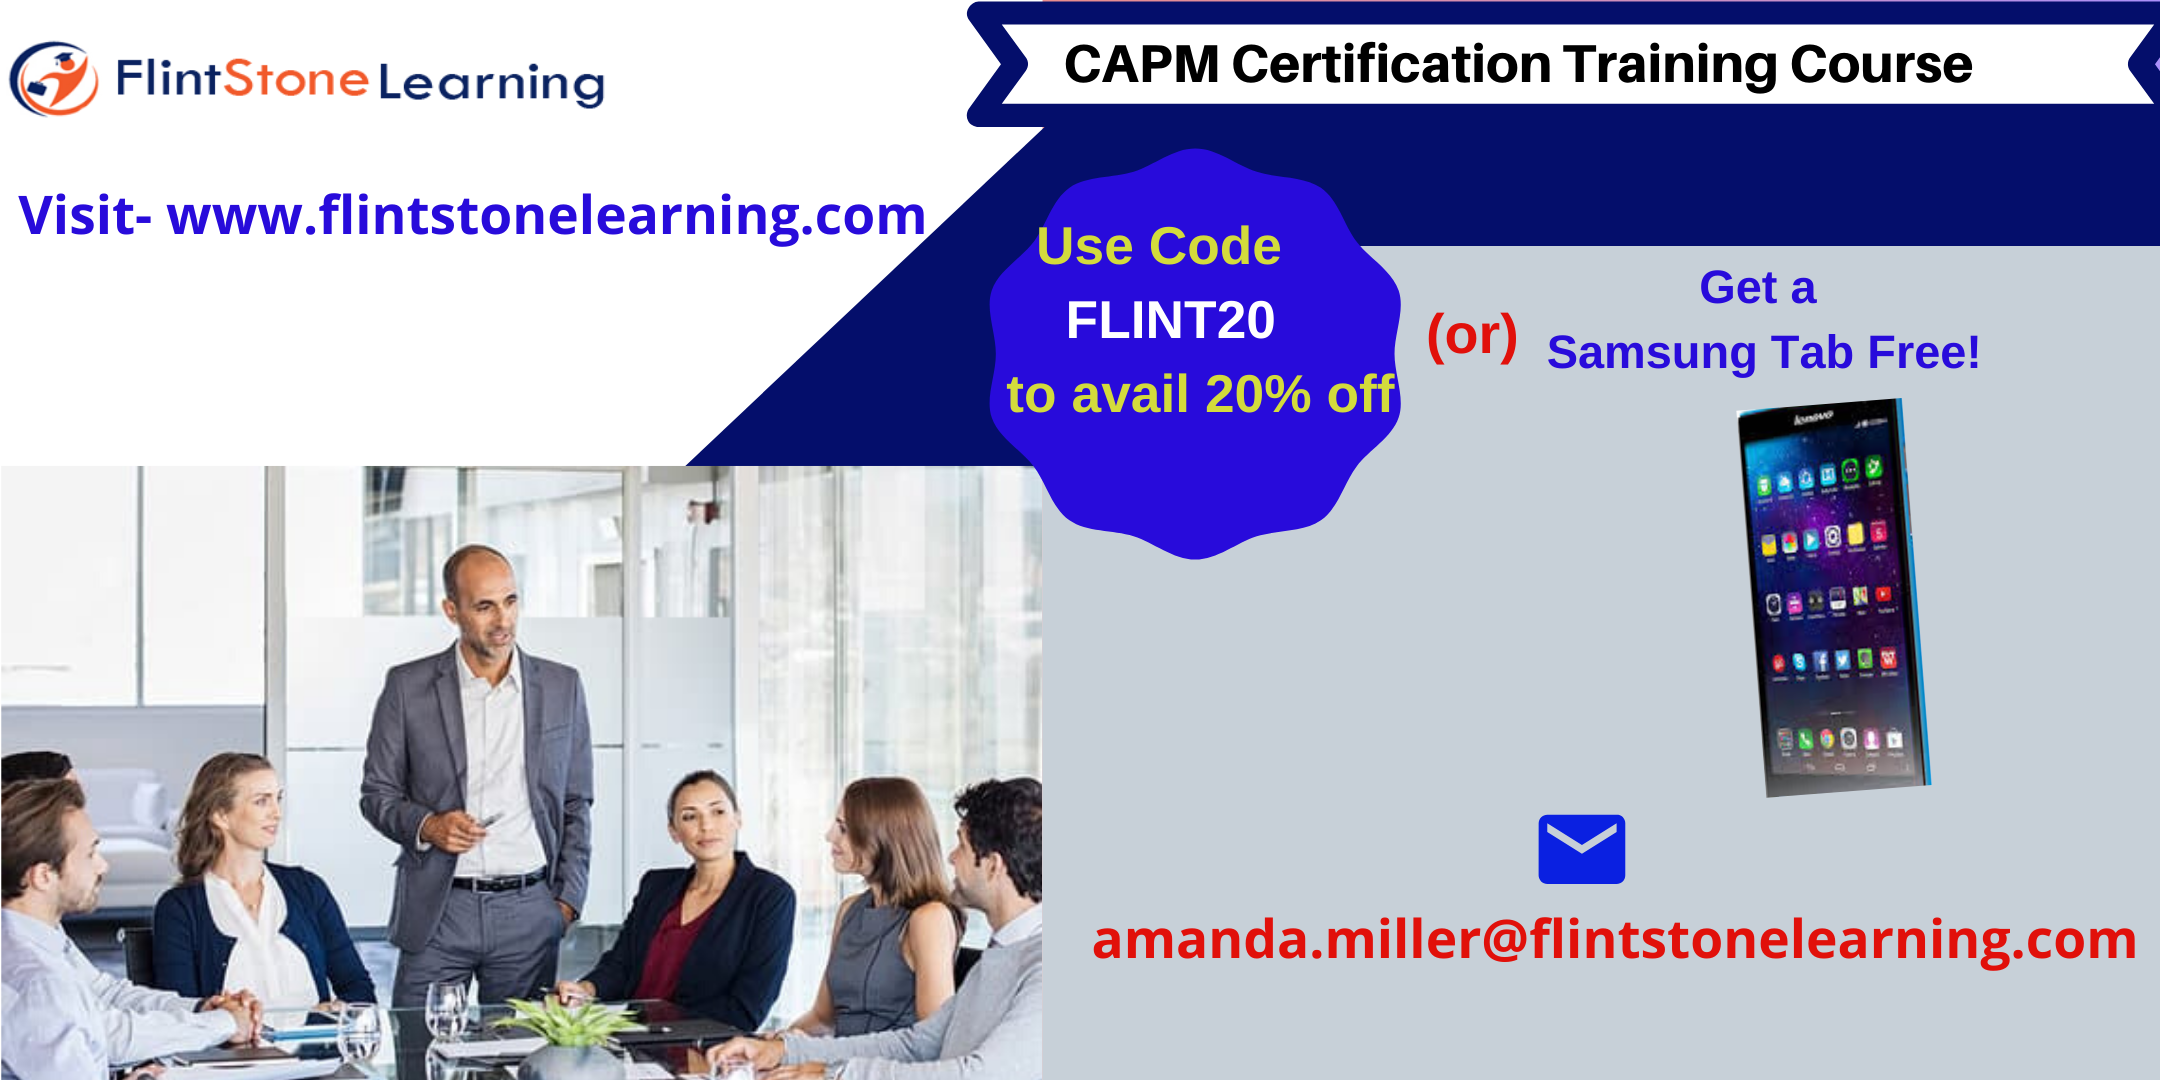 CAPM Certification Training Course in Indian Wells, CA